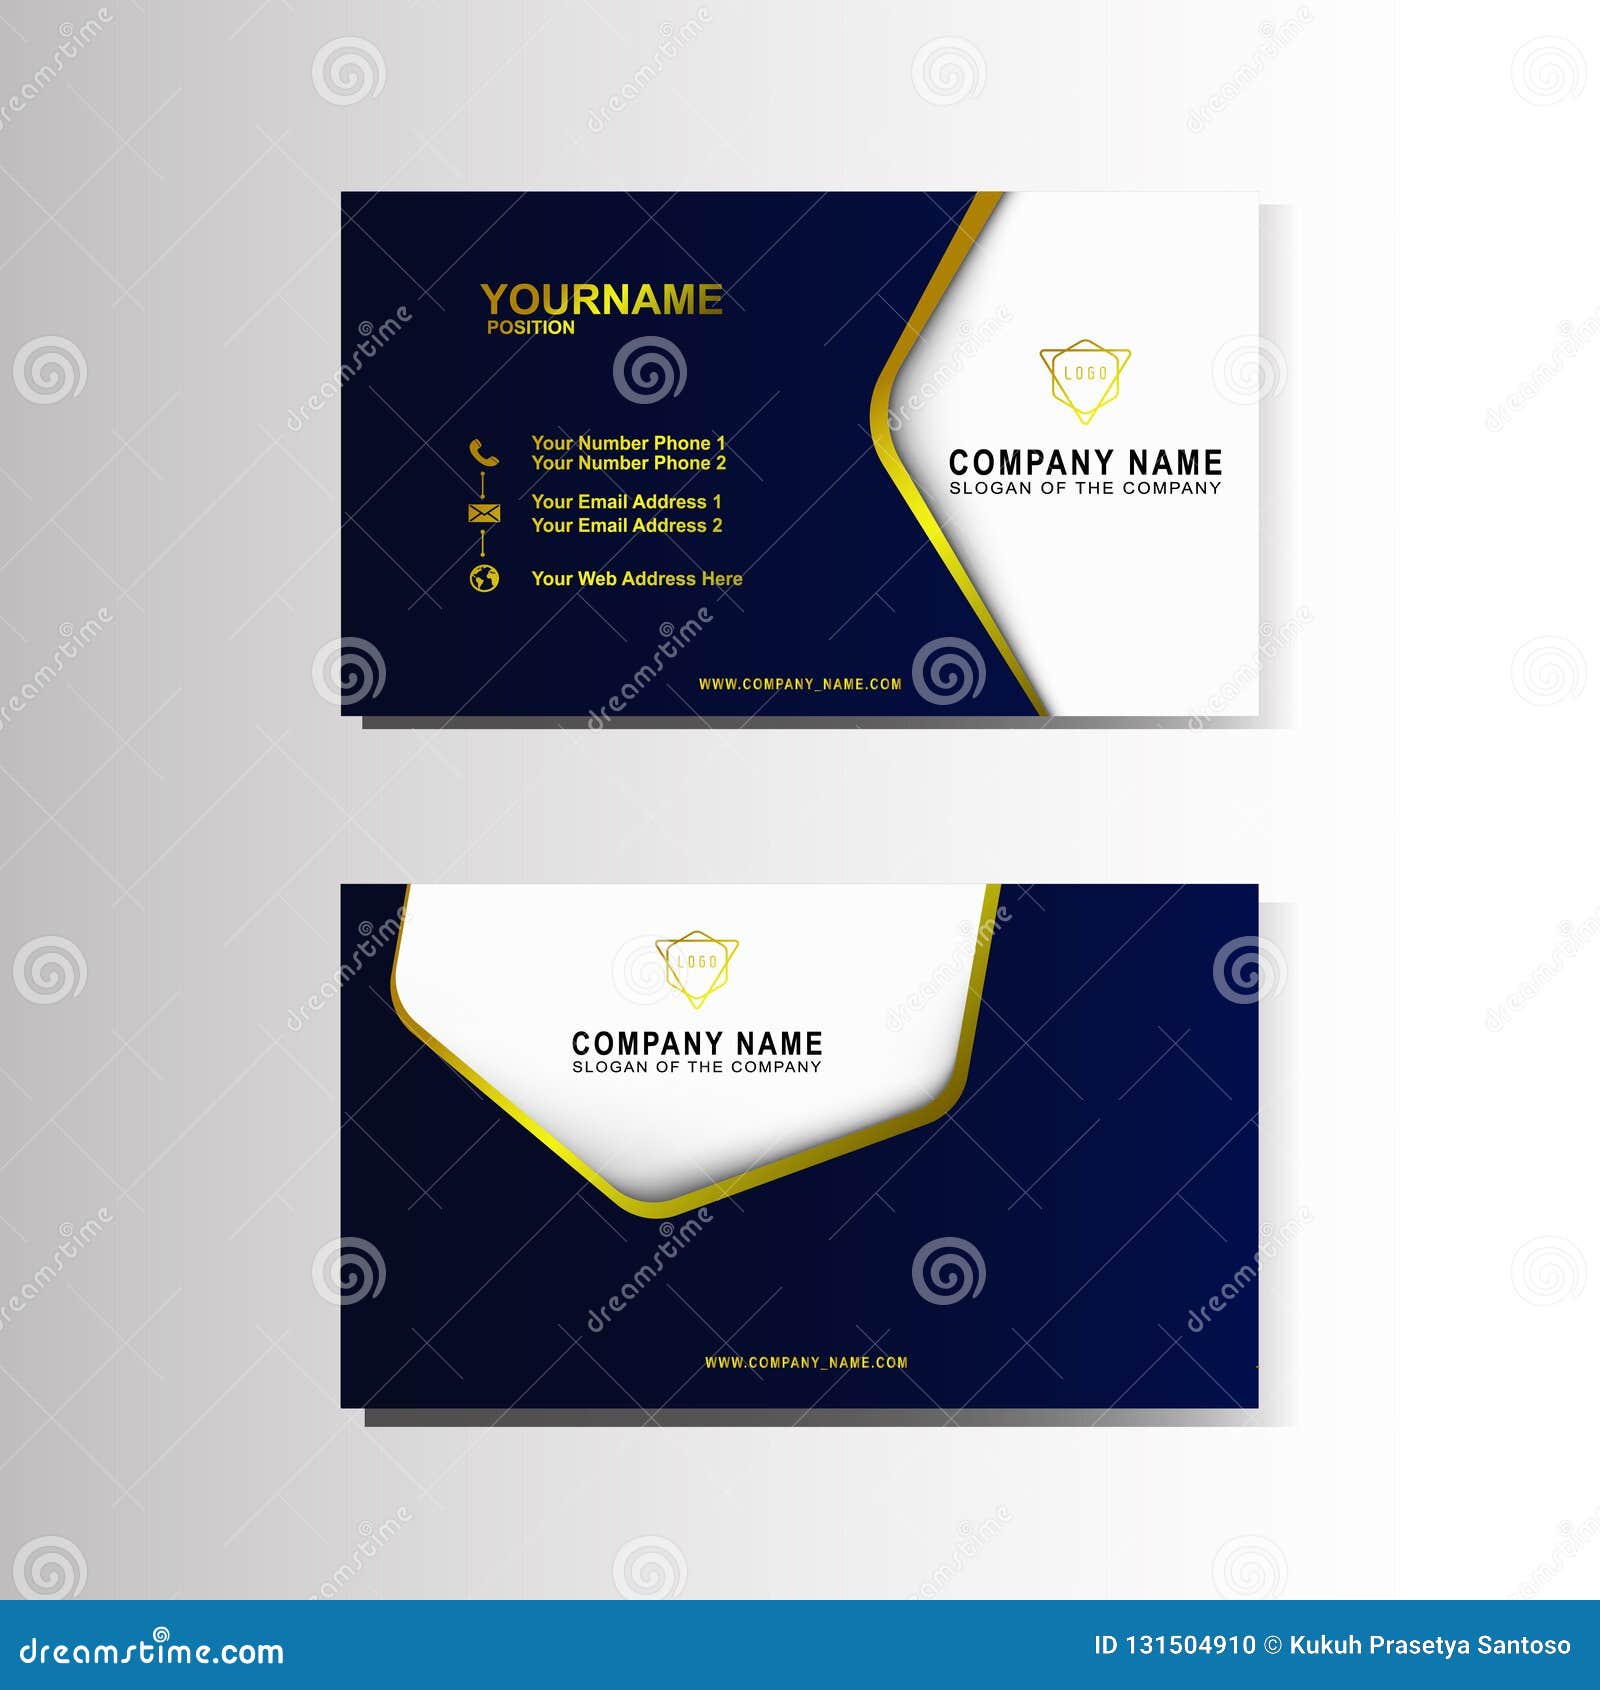 Luxury Business Card Design Templates for Personal and Company Pertaining To Free Personal Business Card Templates